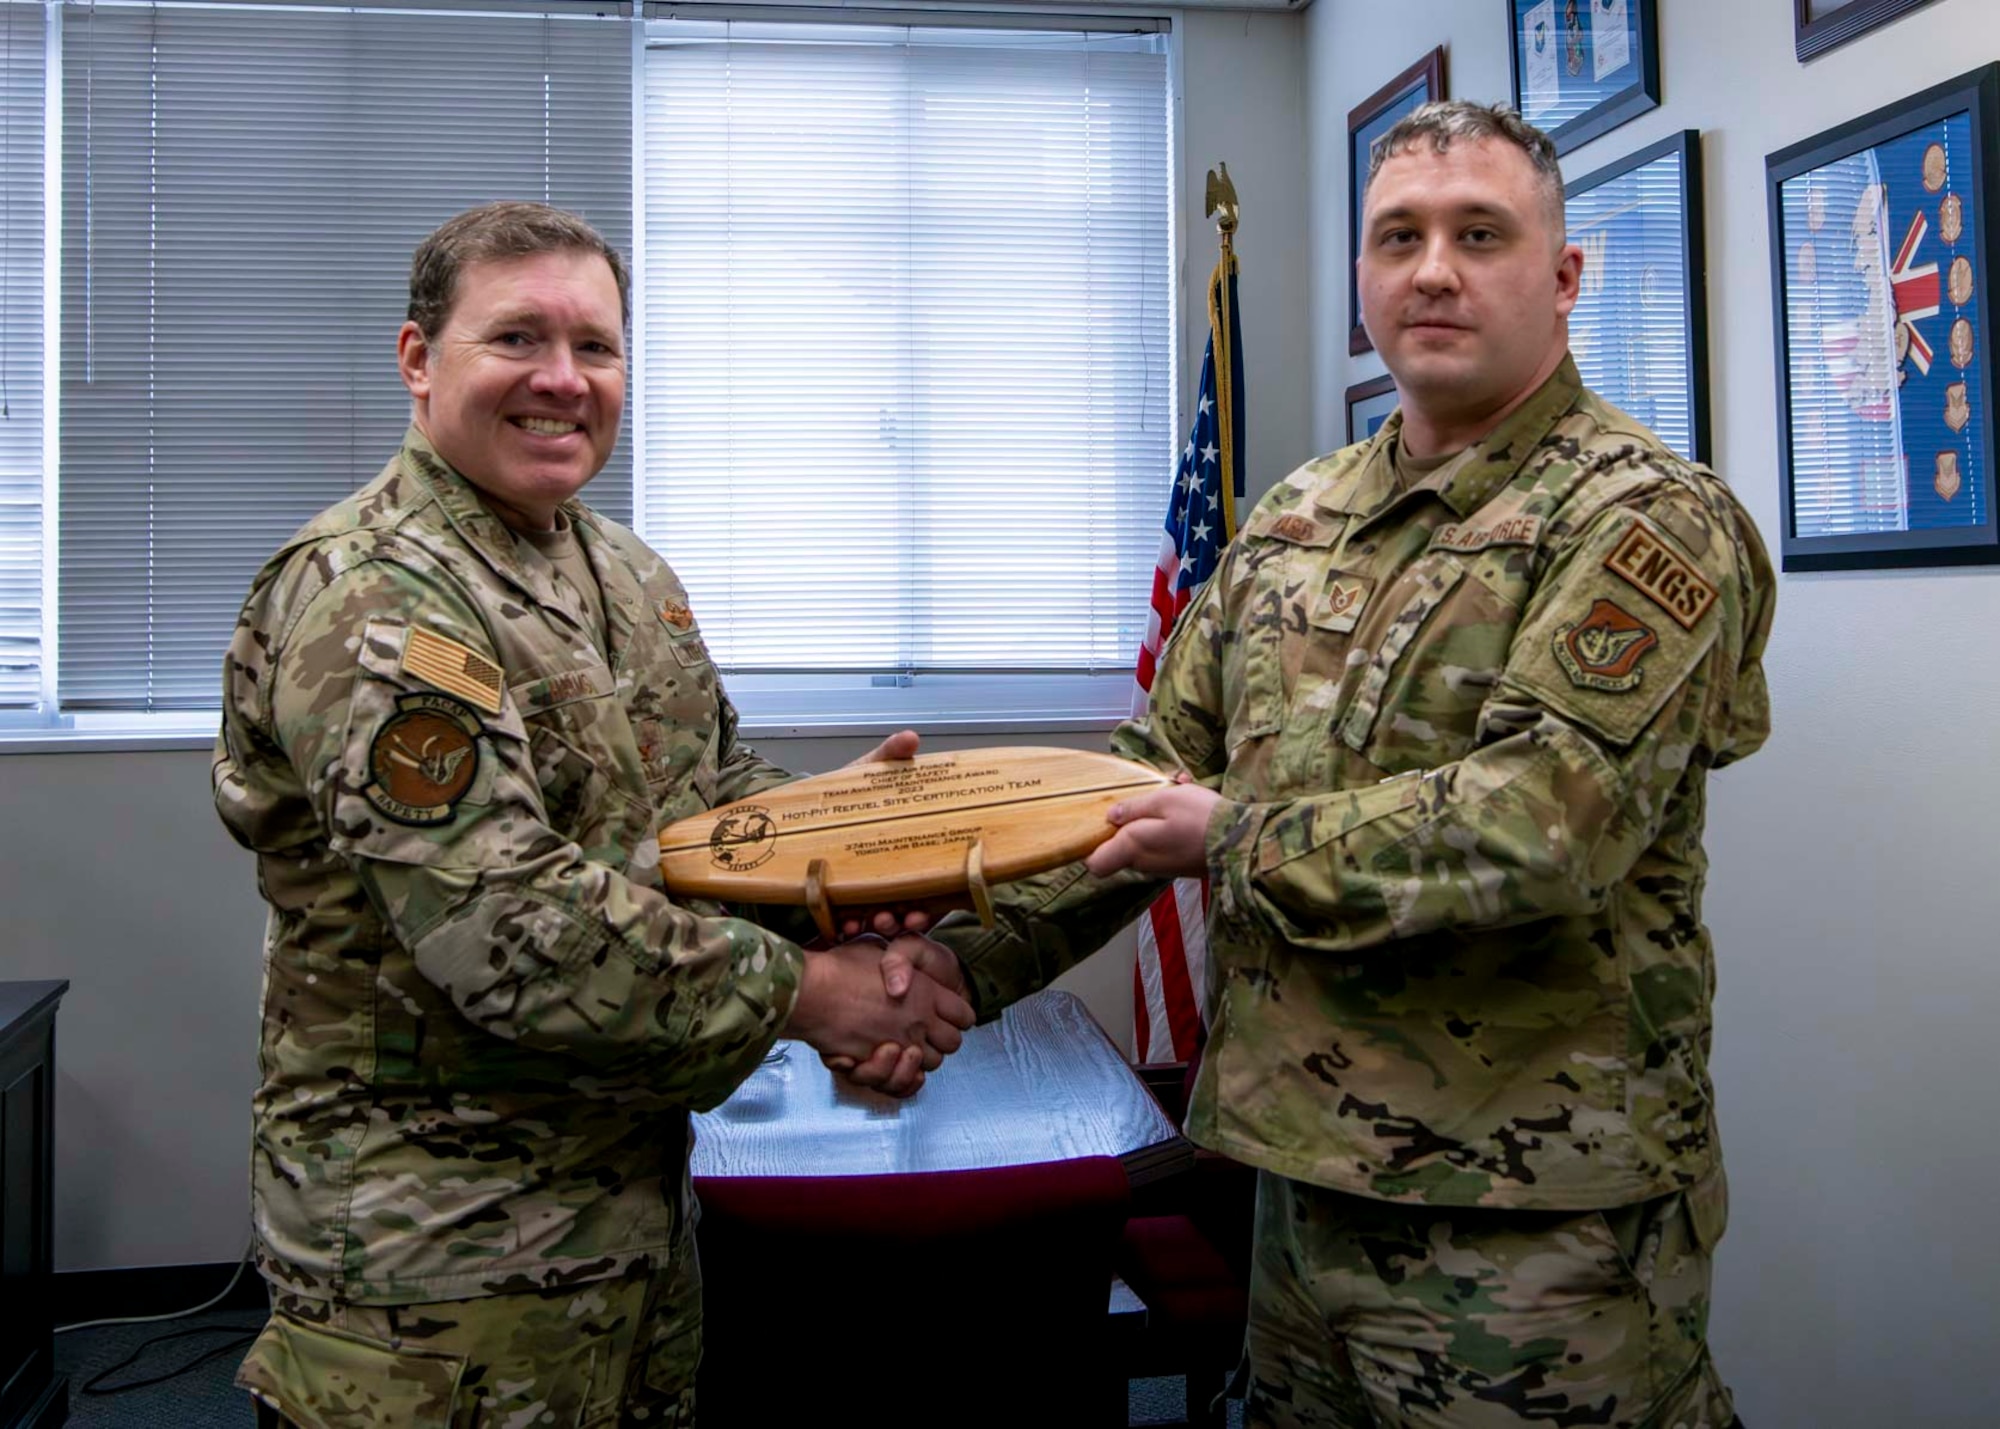 A military man receives an award from another military man.